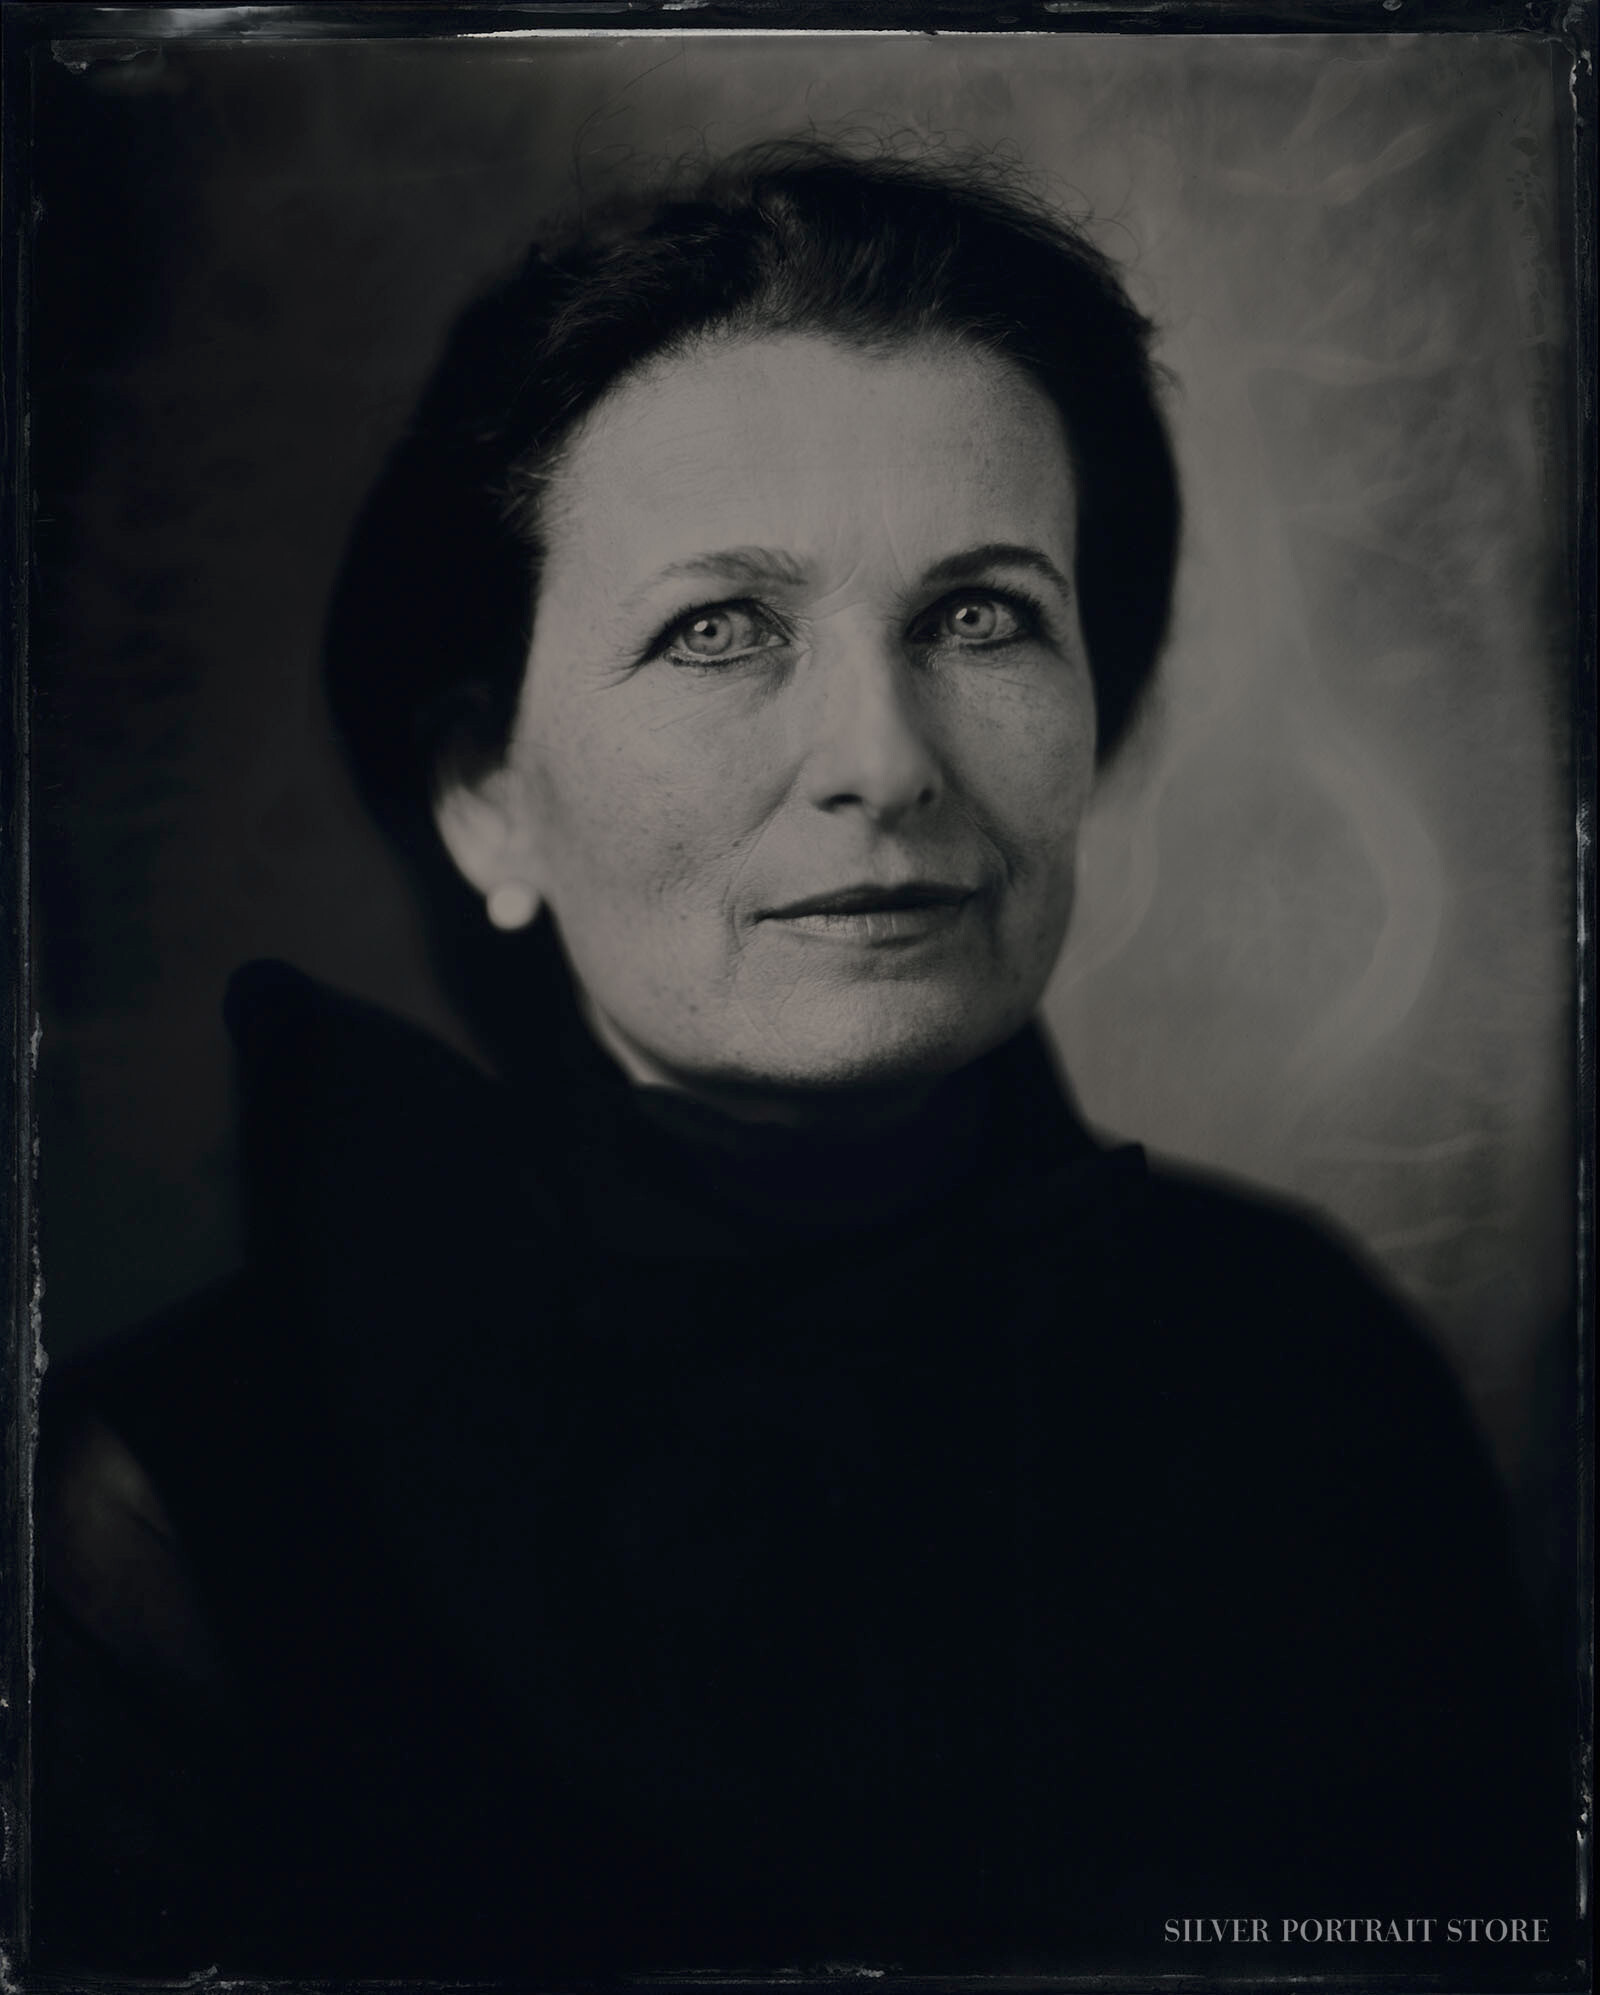 Julia Teves -Silver Portrait Store-Scan from Wet plate collodion-Tintype 20 x 25 cm.